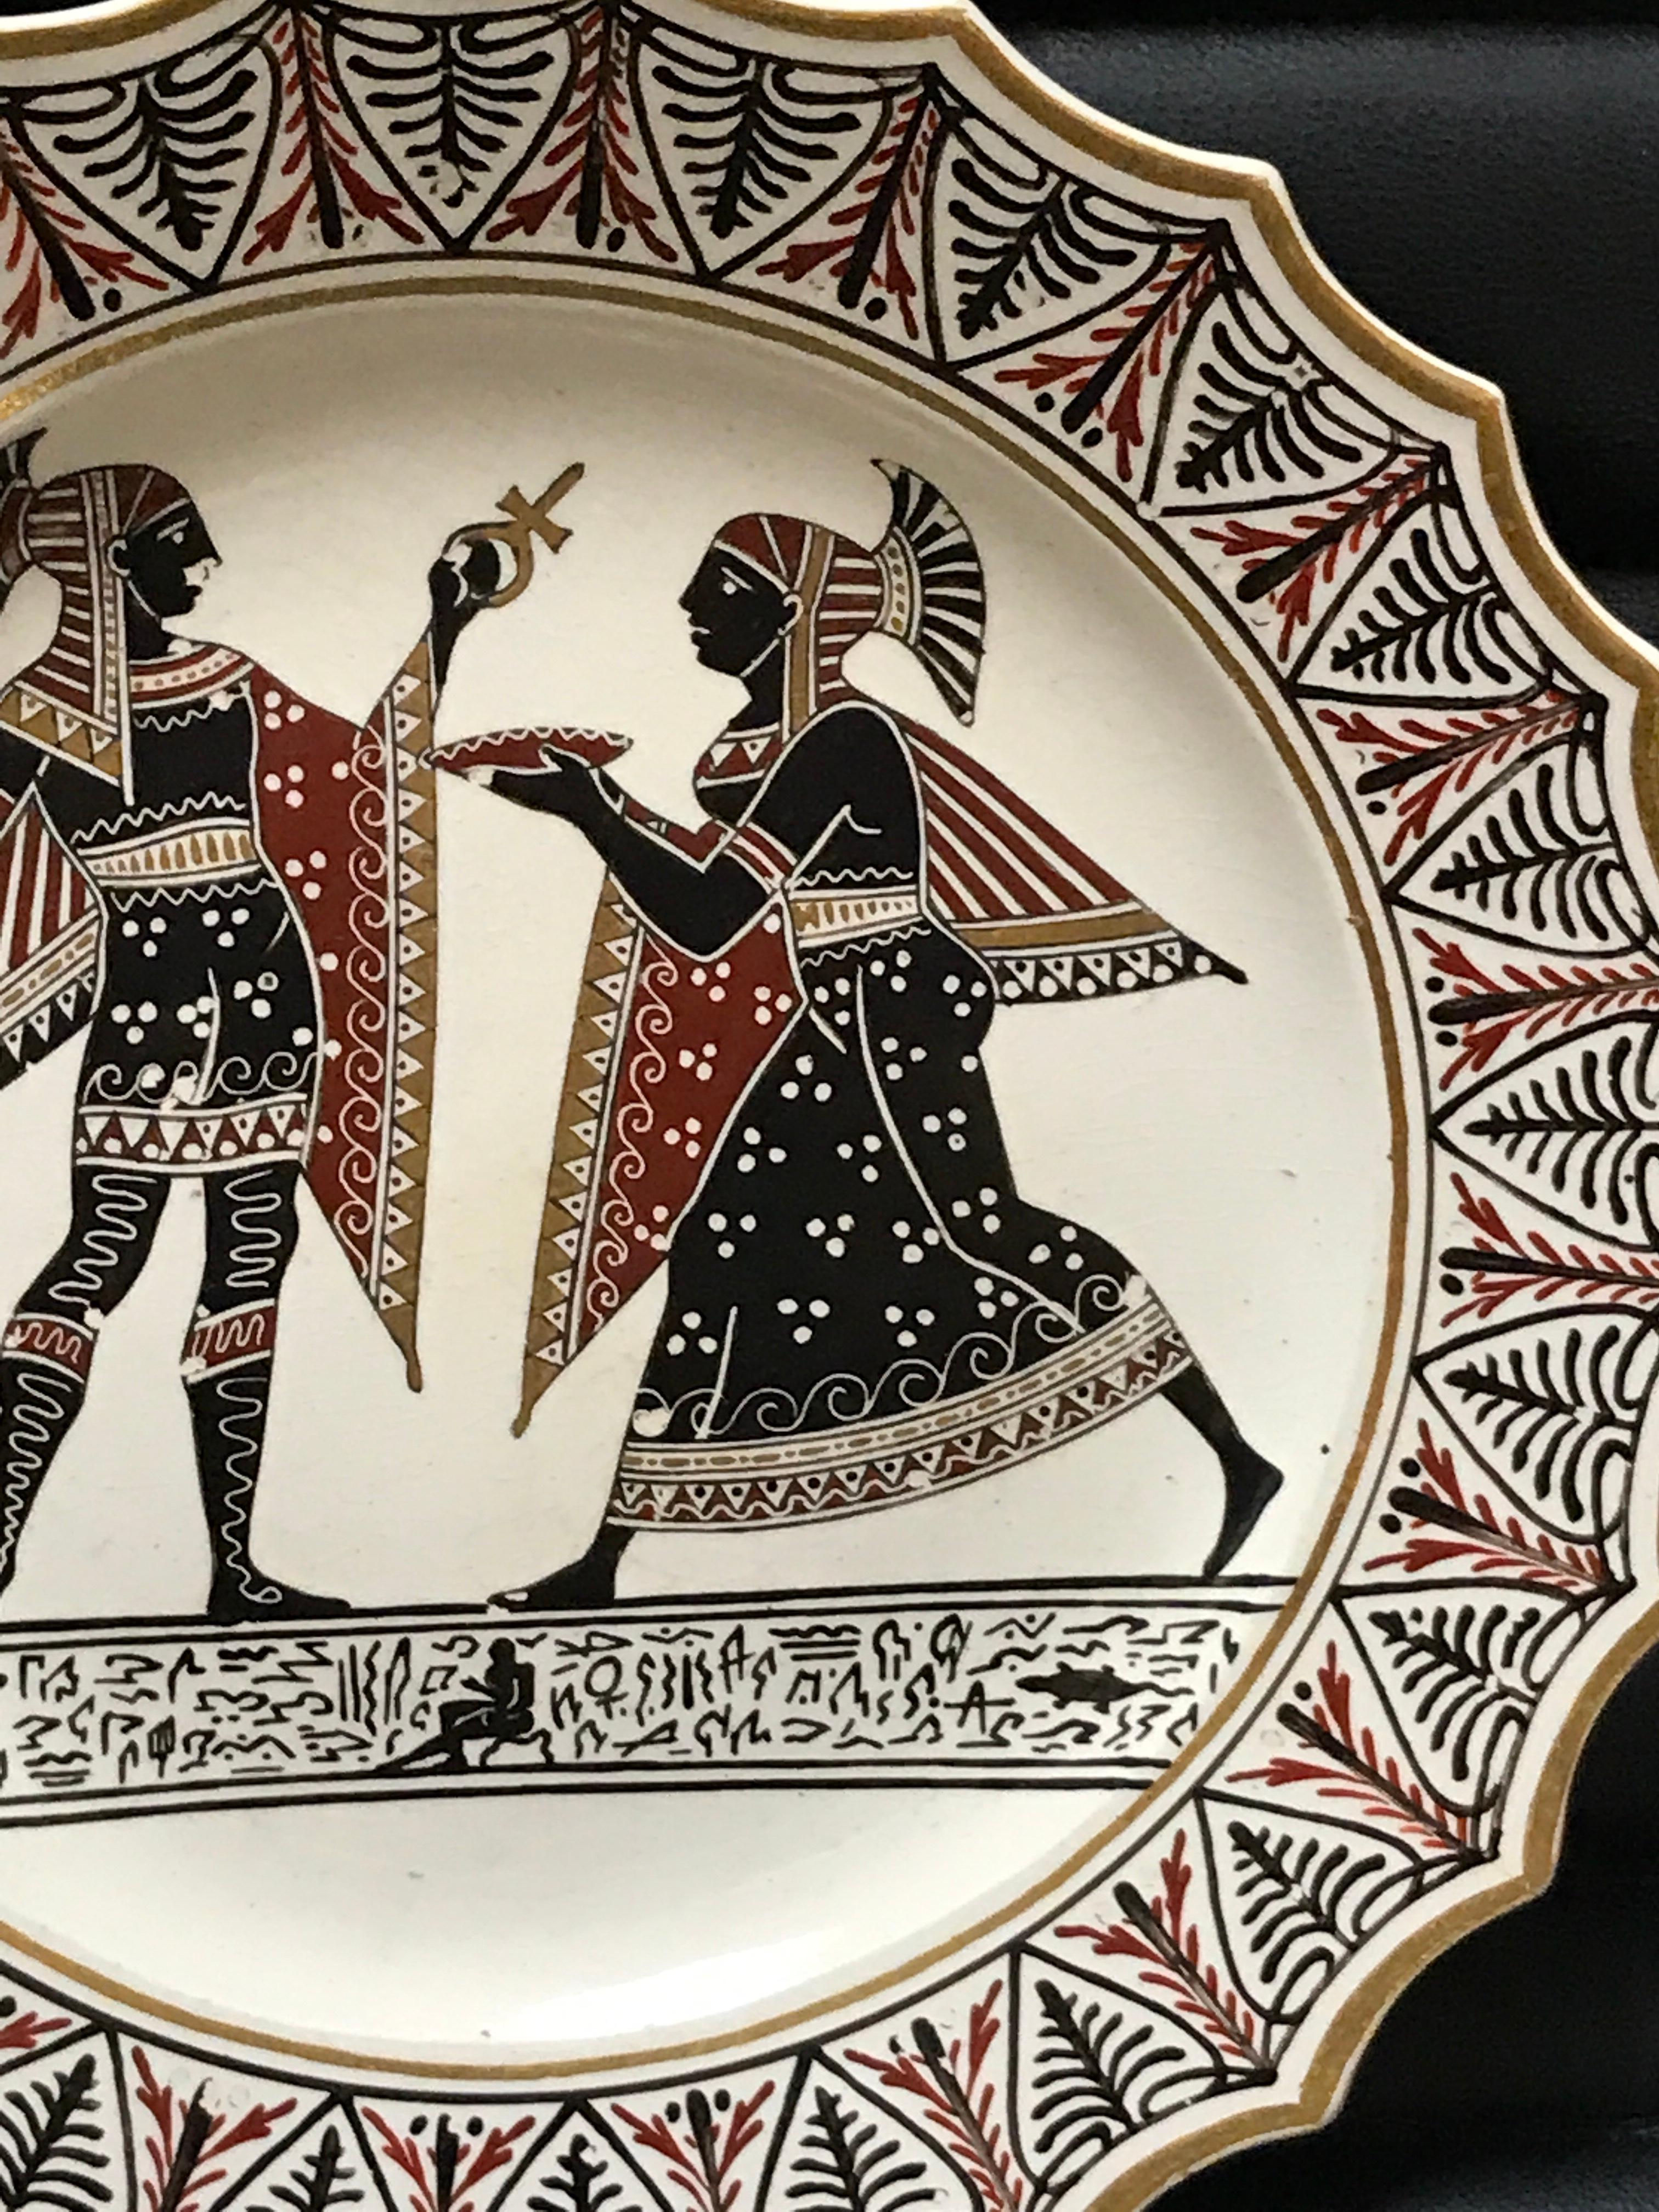 Pair of Giustiniani Egyptomania Pottery Plates with Gilt Borders In Fair Condition For Sale In West Palm Beach, FL